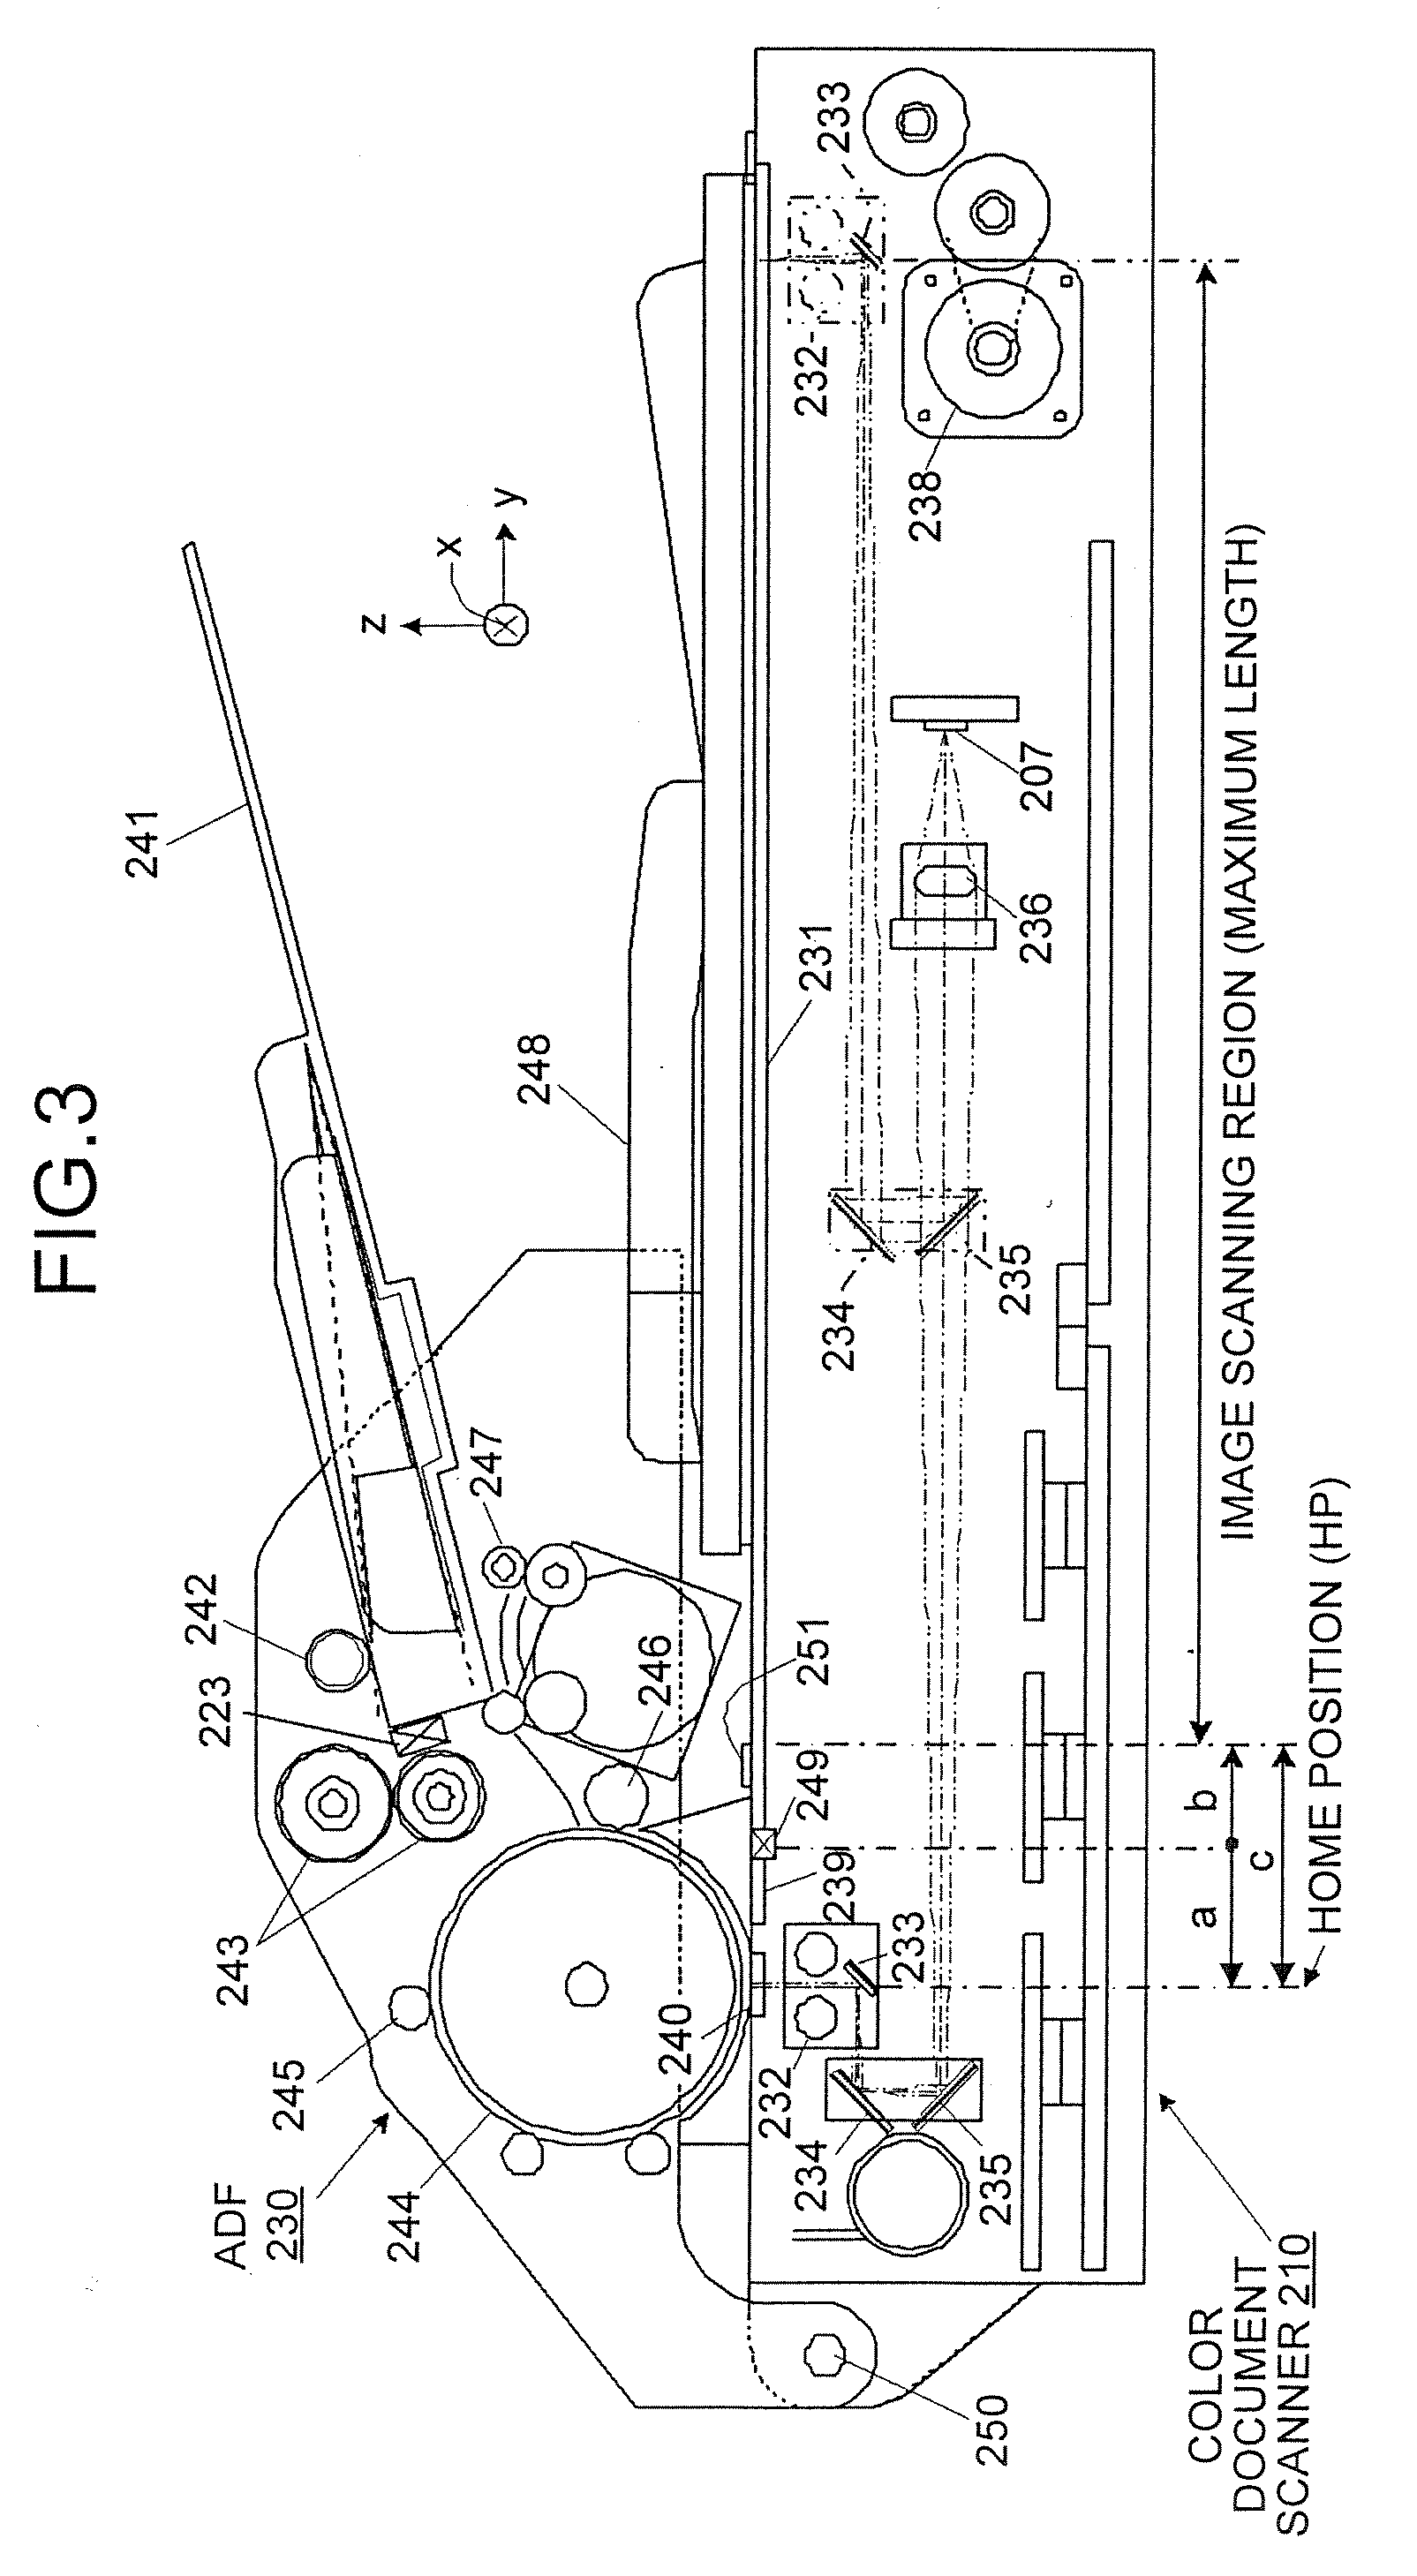 Image data processing device, image processing device, image forming device, and image transmitting system